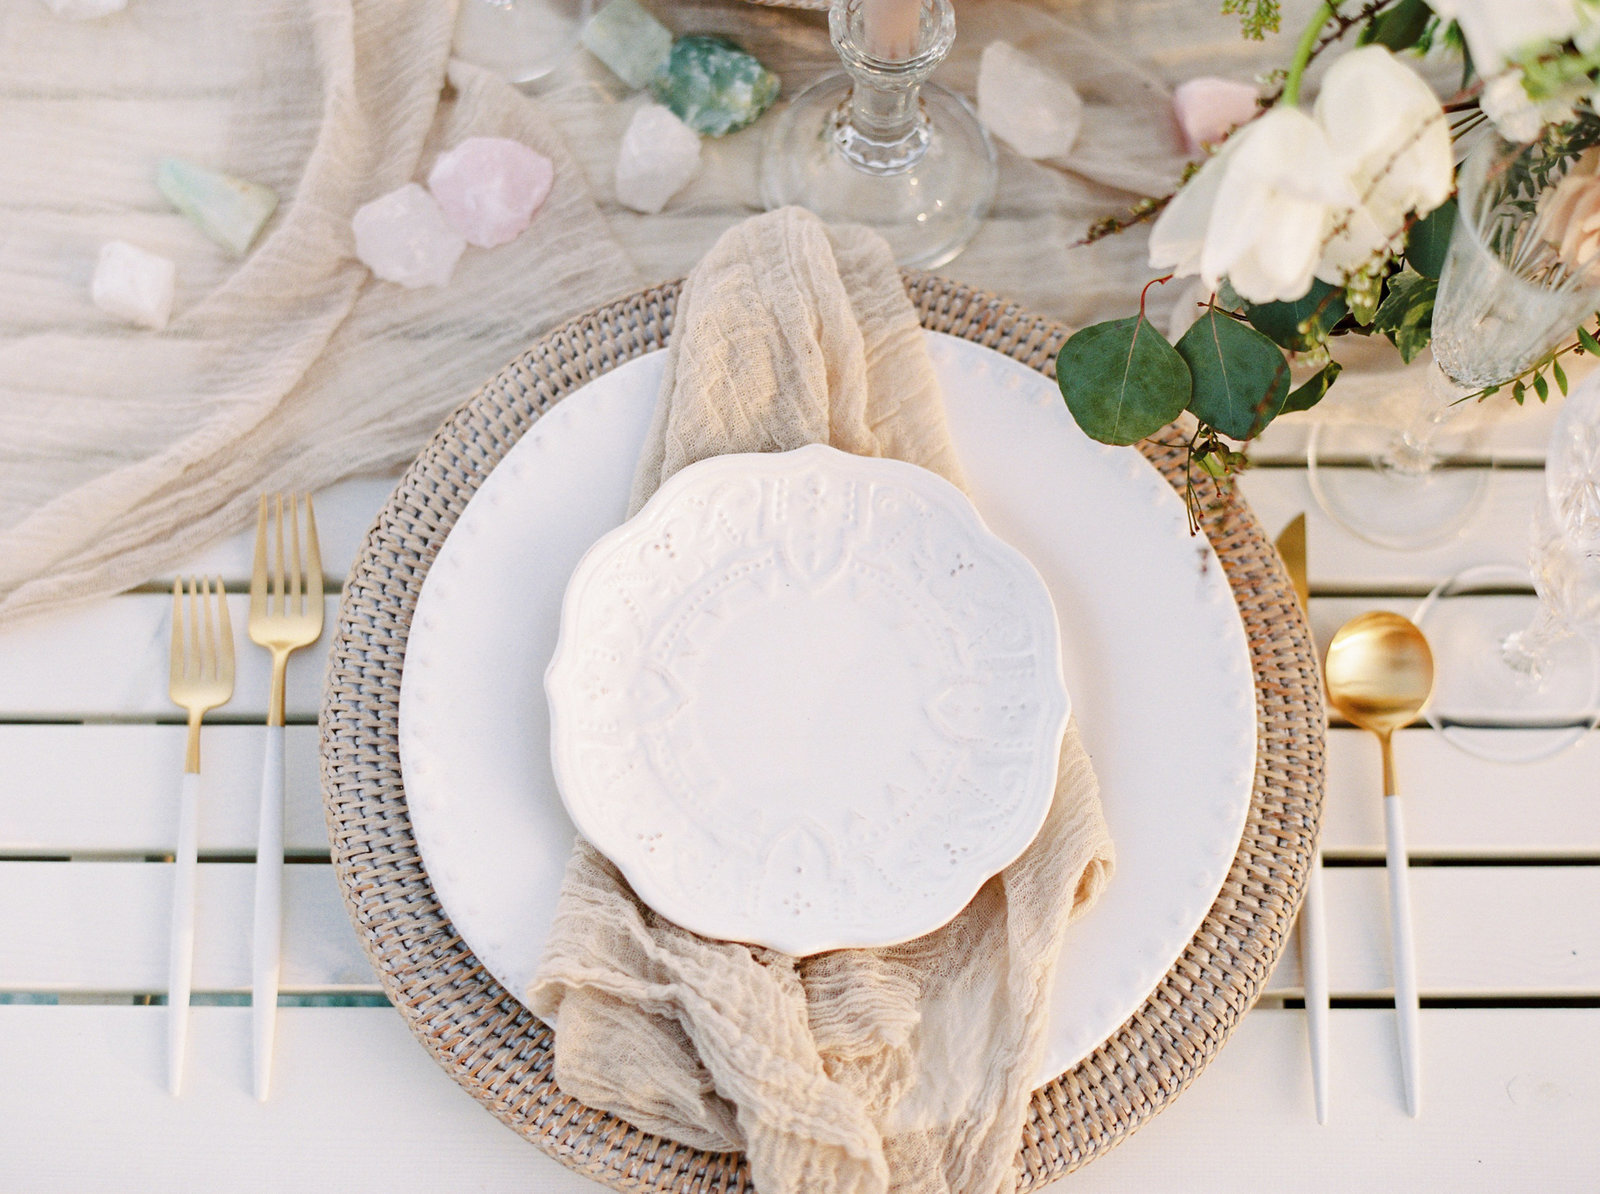 Plate-Occasions-Toronto-Charger-Plate-Rentals